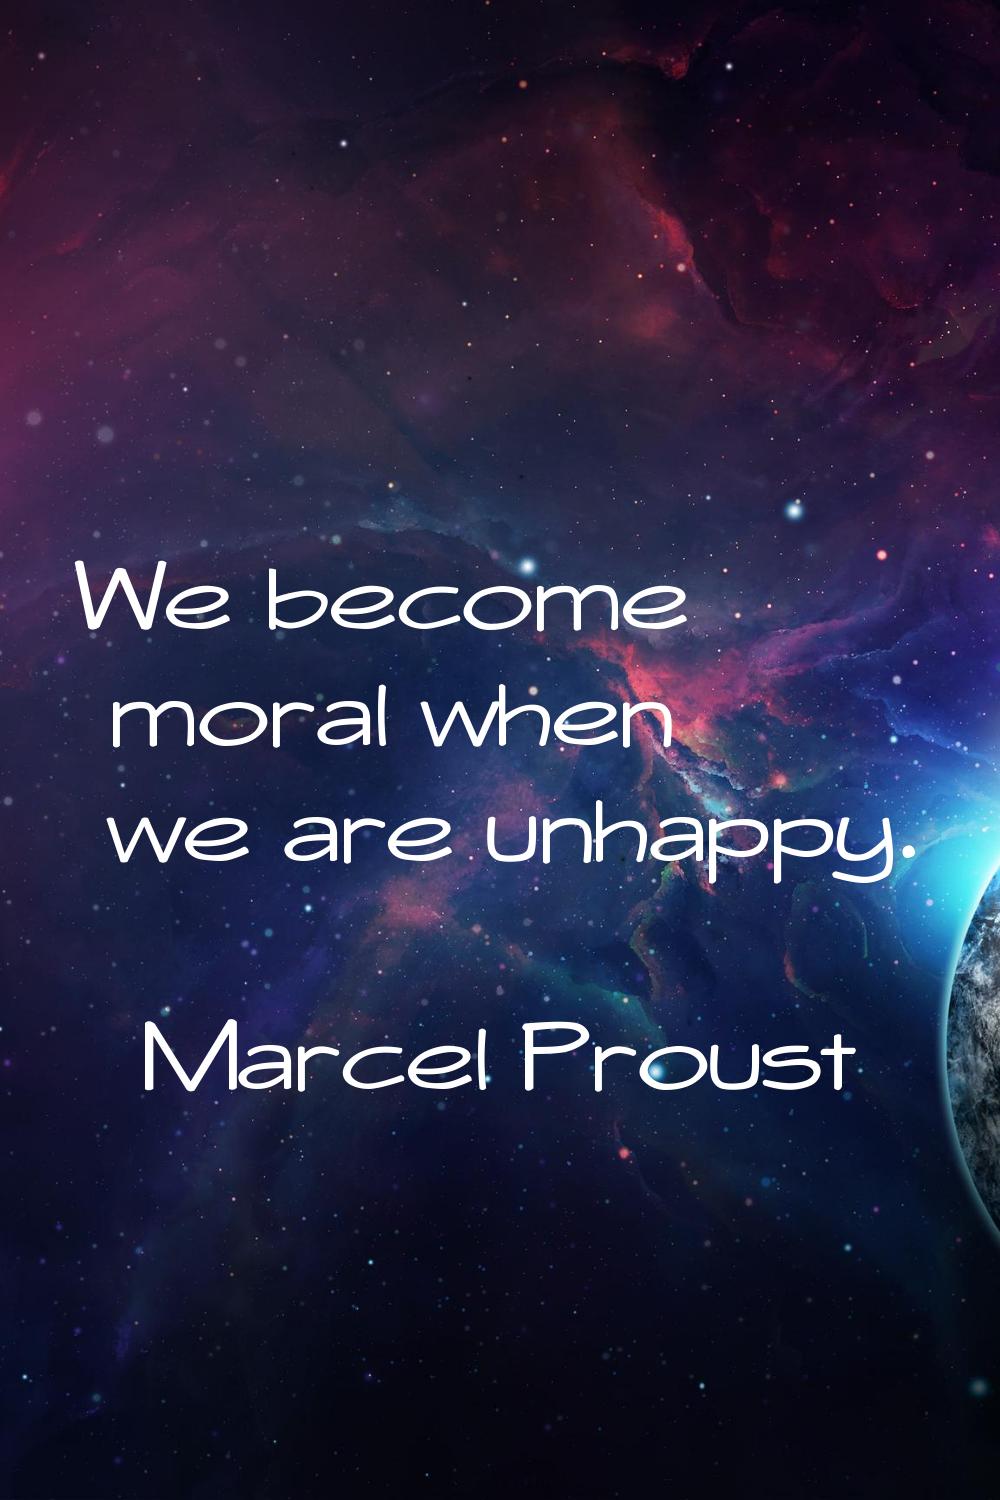 We become moral when we are unhappy.